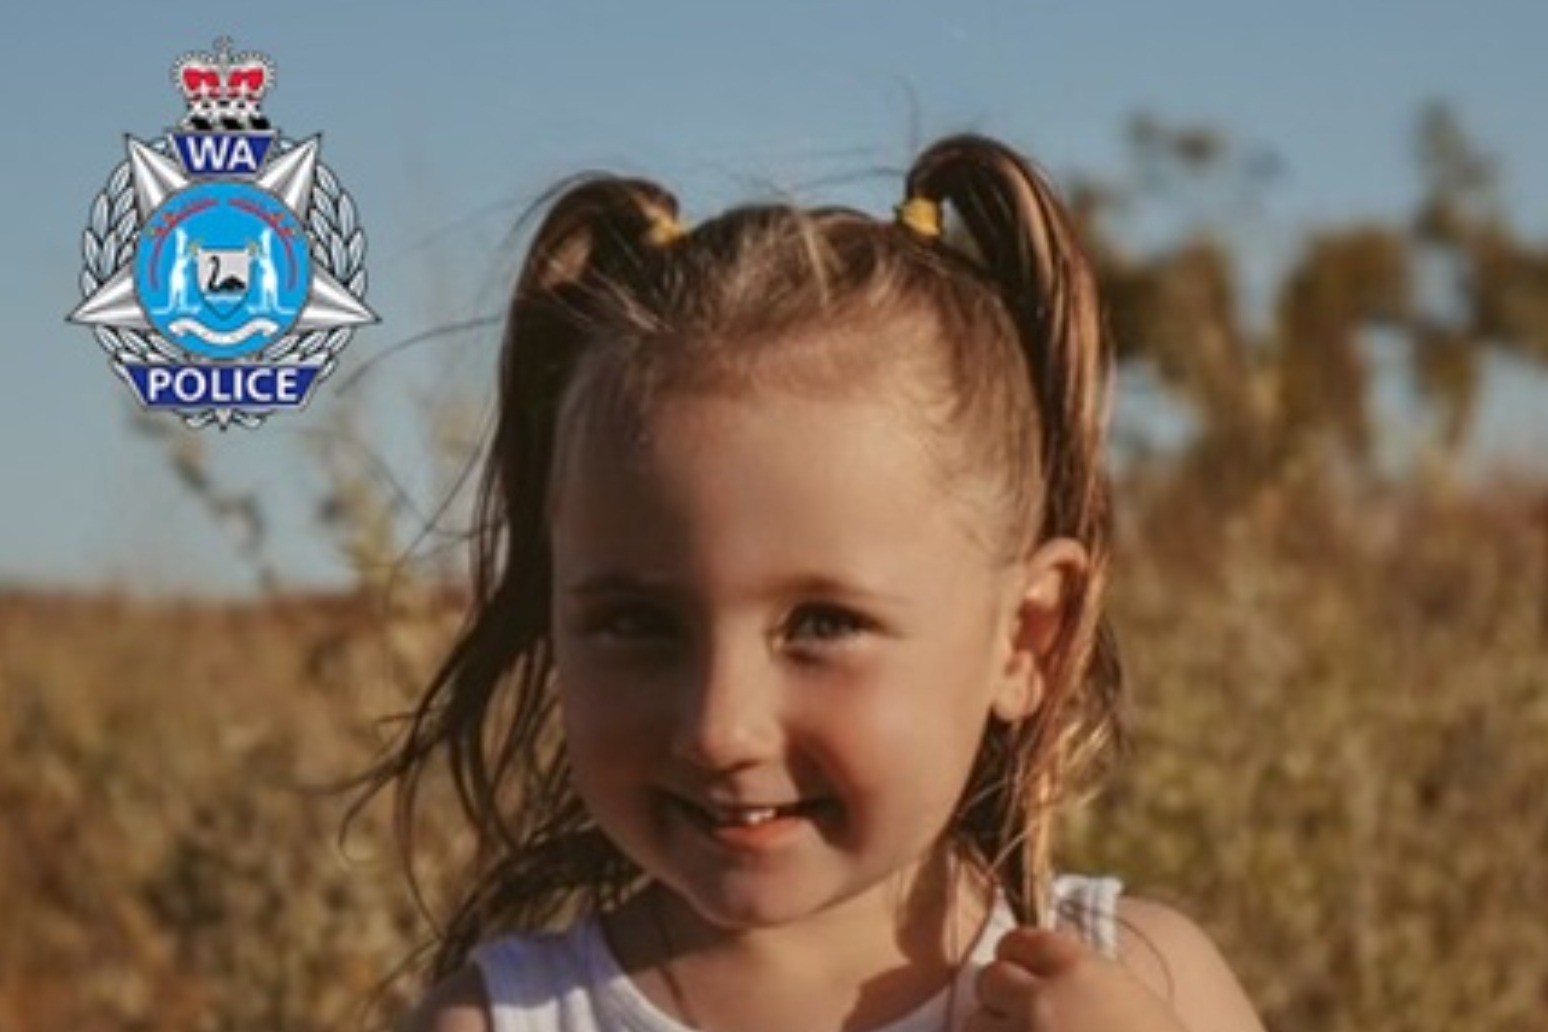 Police have announced that four-year-old Cleo Smith has been found alive 